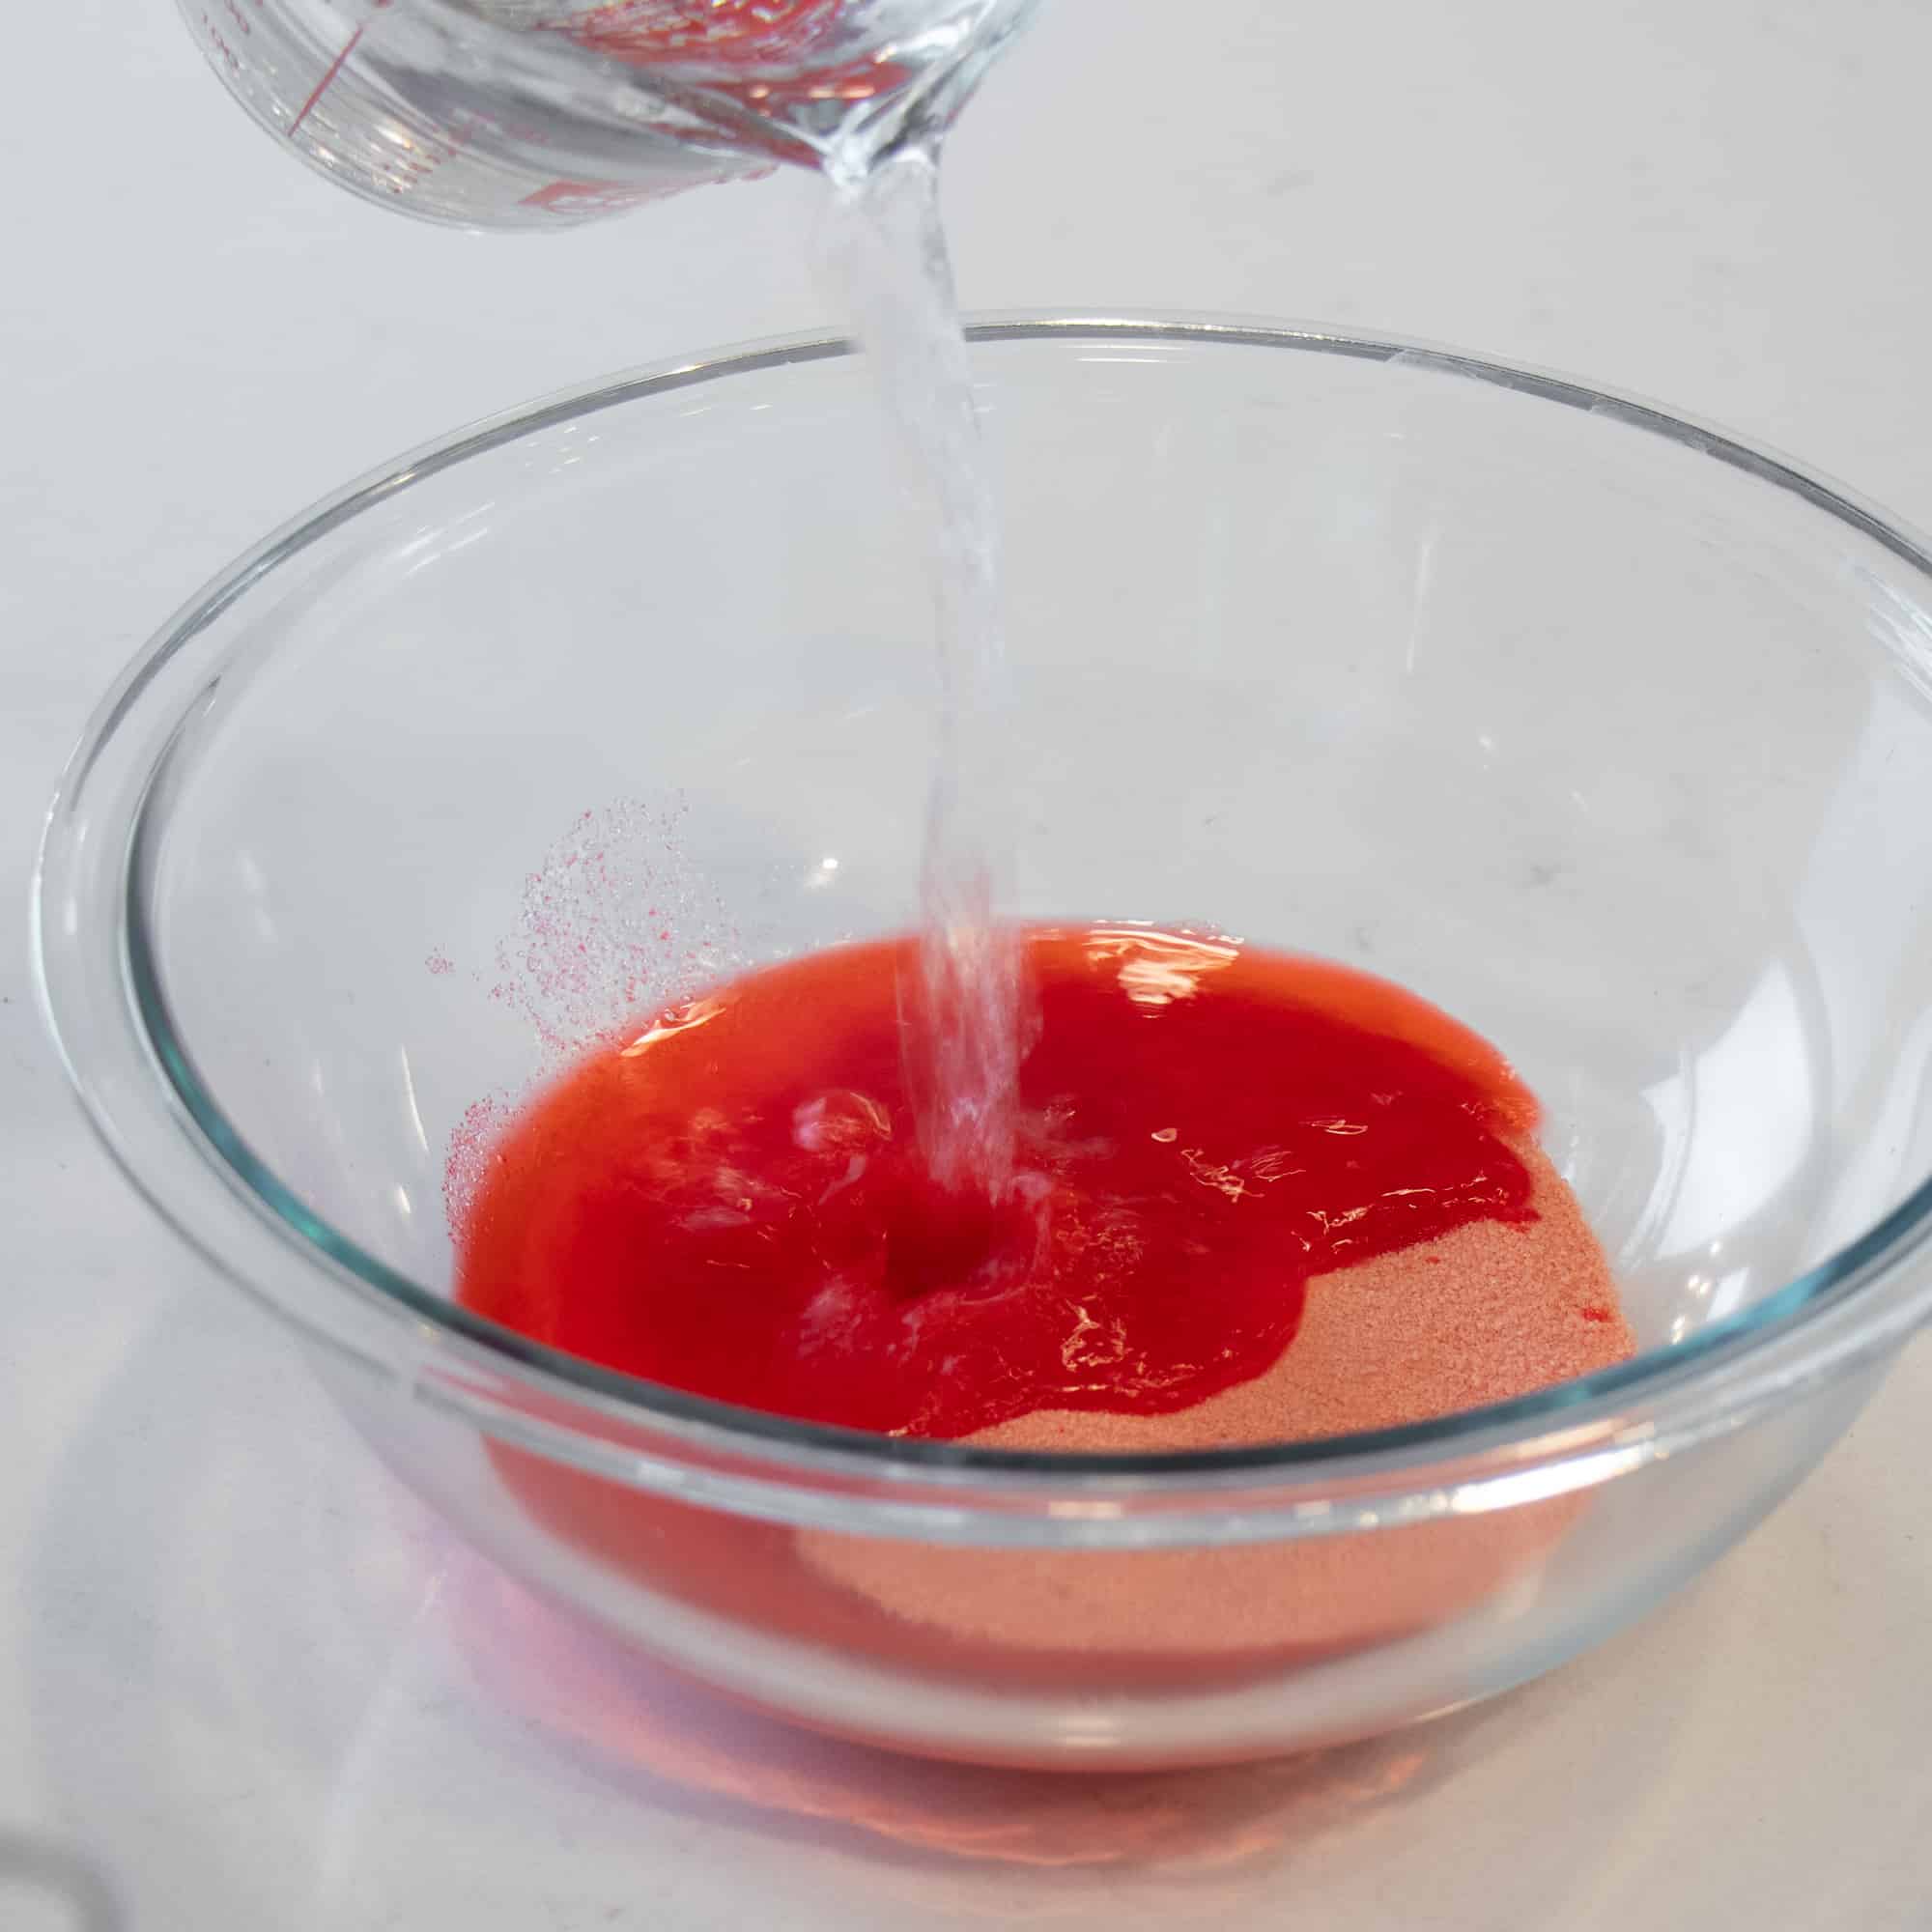 Dissolve the Jello crystals with boiling water.